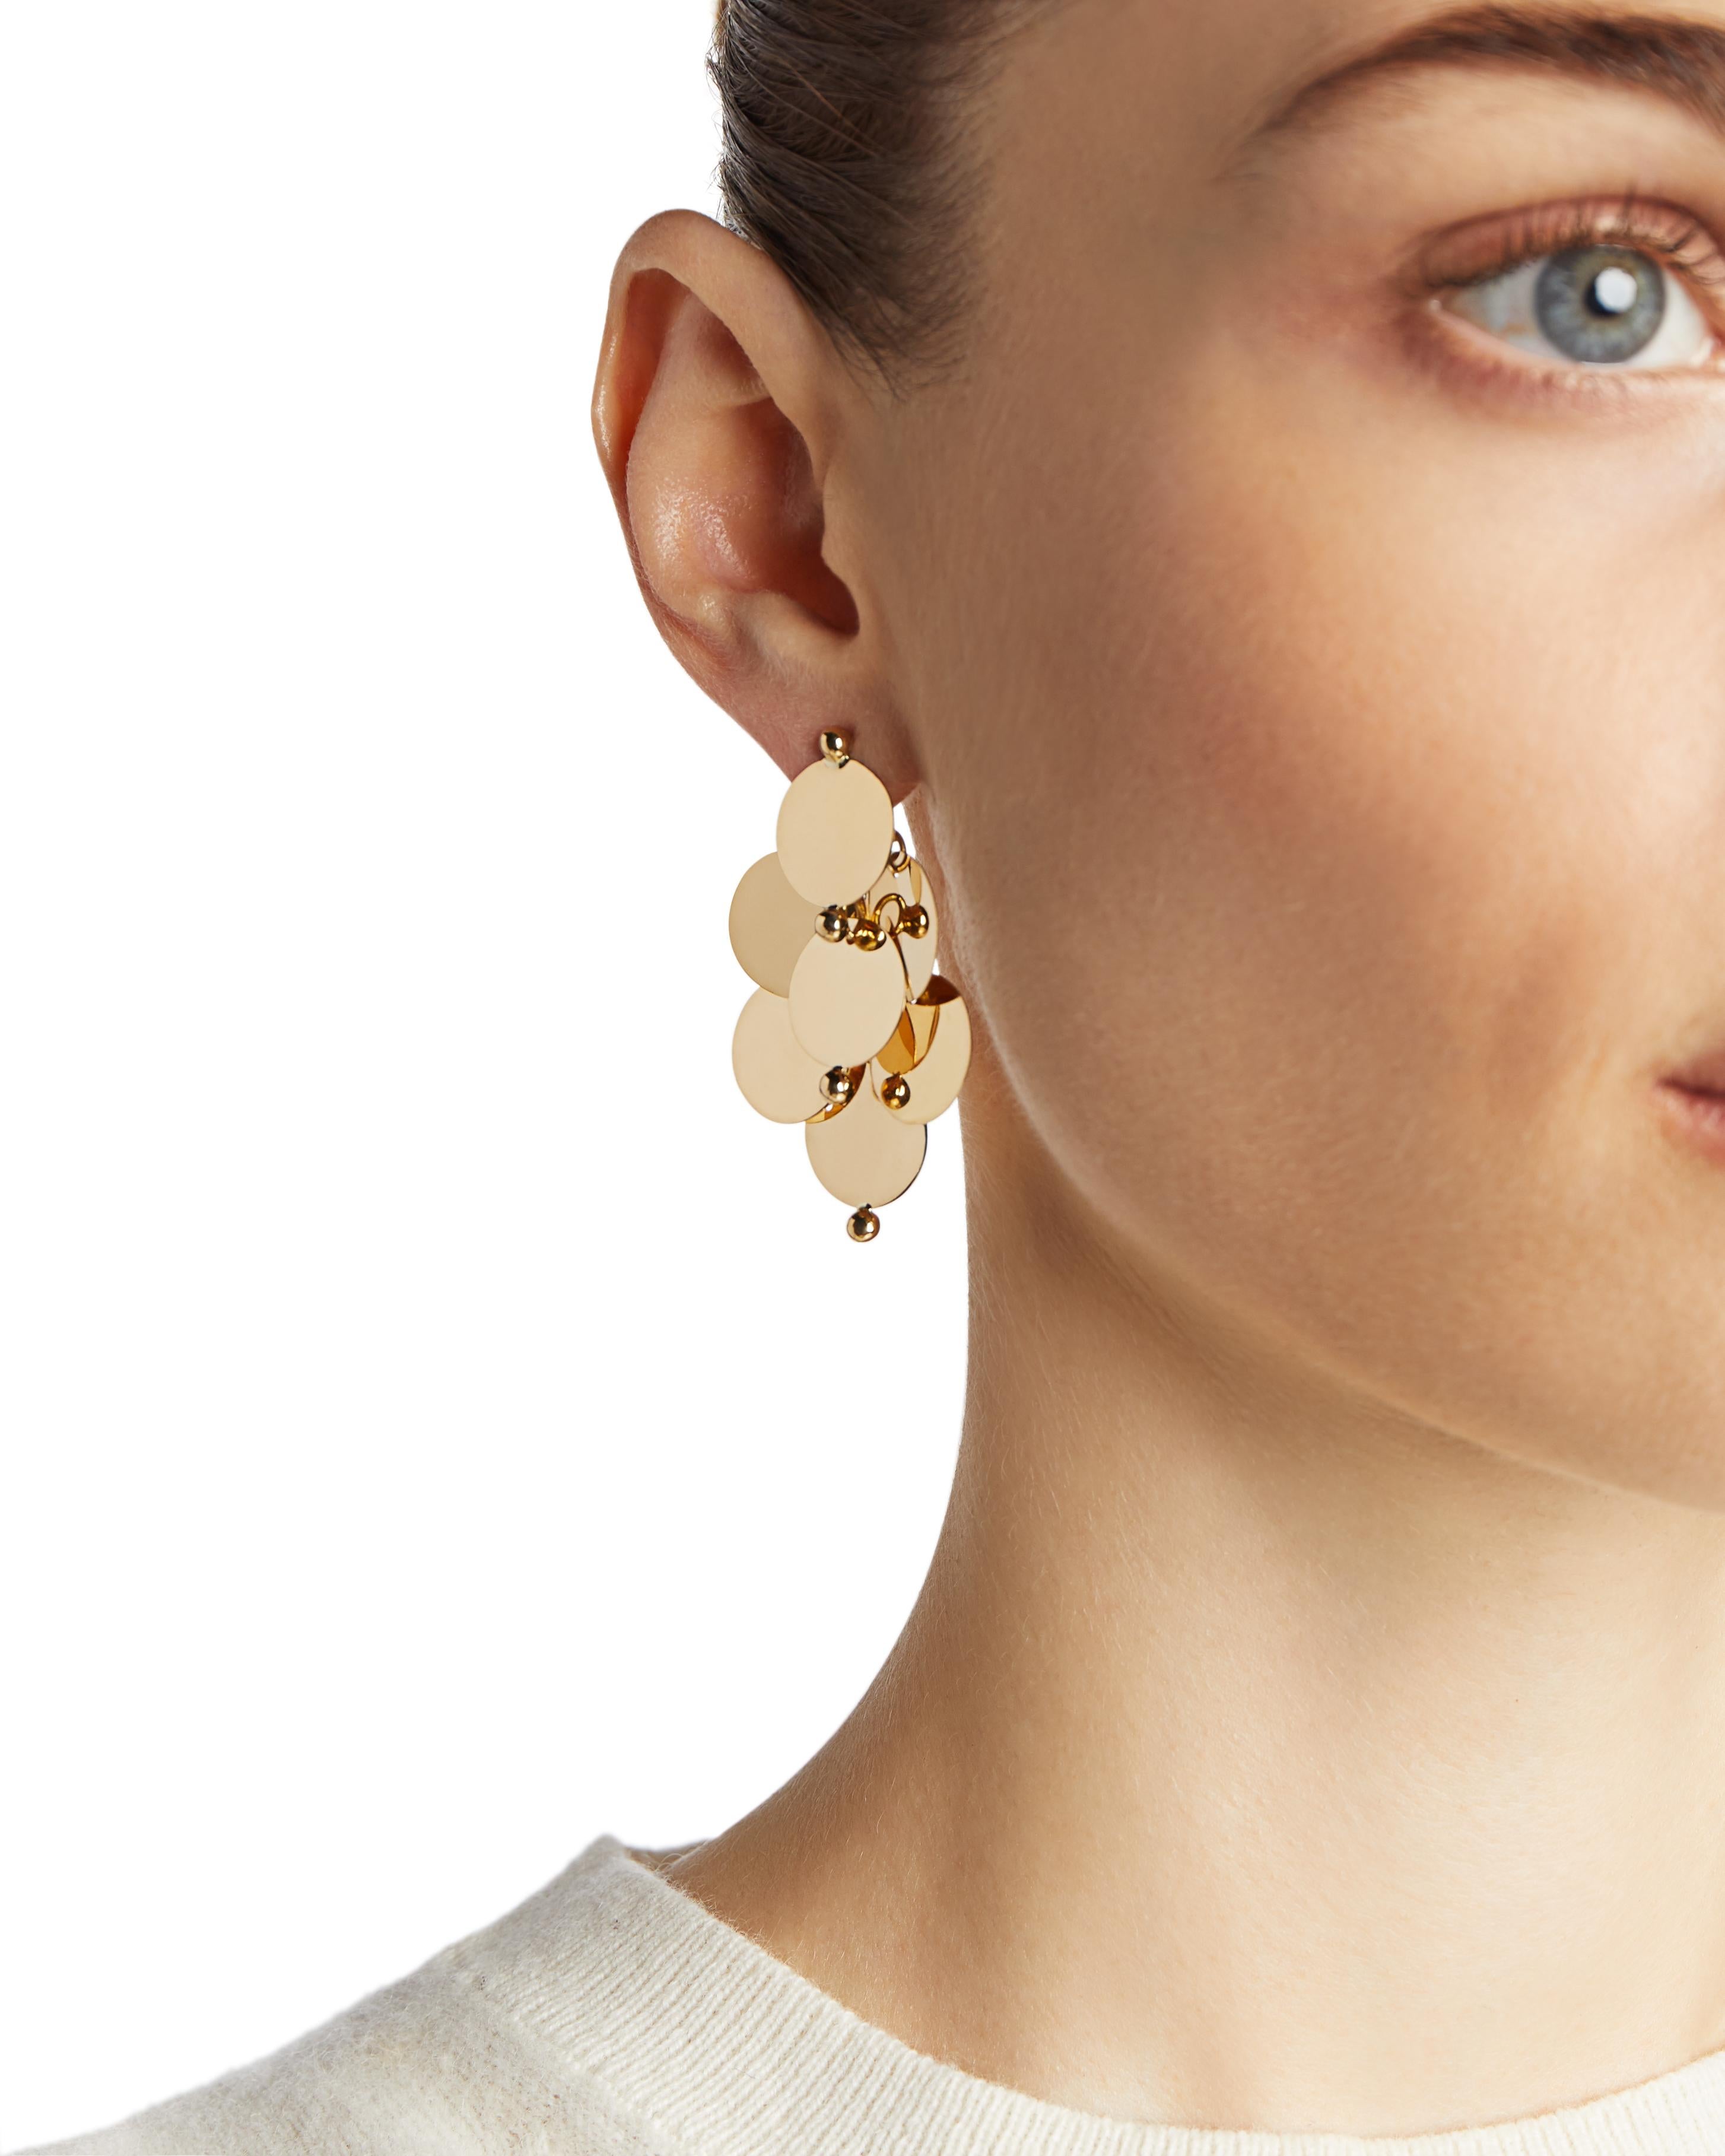 Modern 18kt Fairmined Ecological Yellow Gold William Spratling Dancing Disc Earrings For Sale